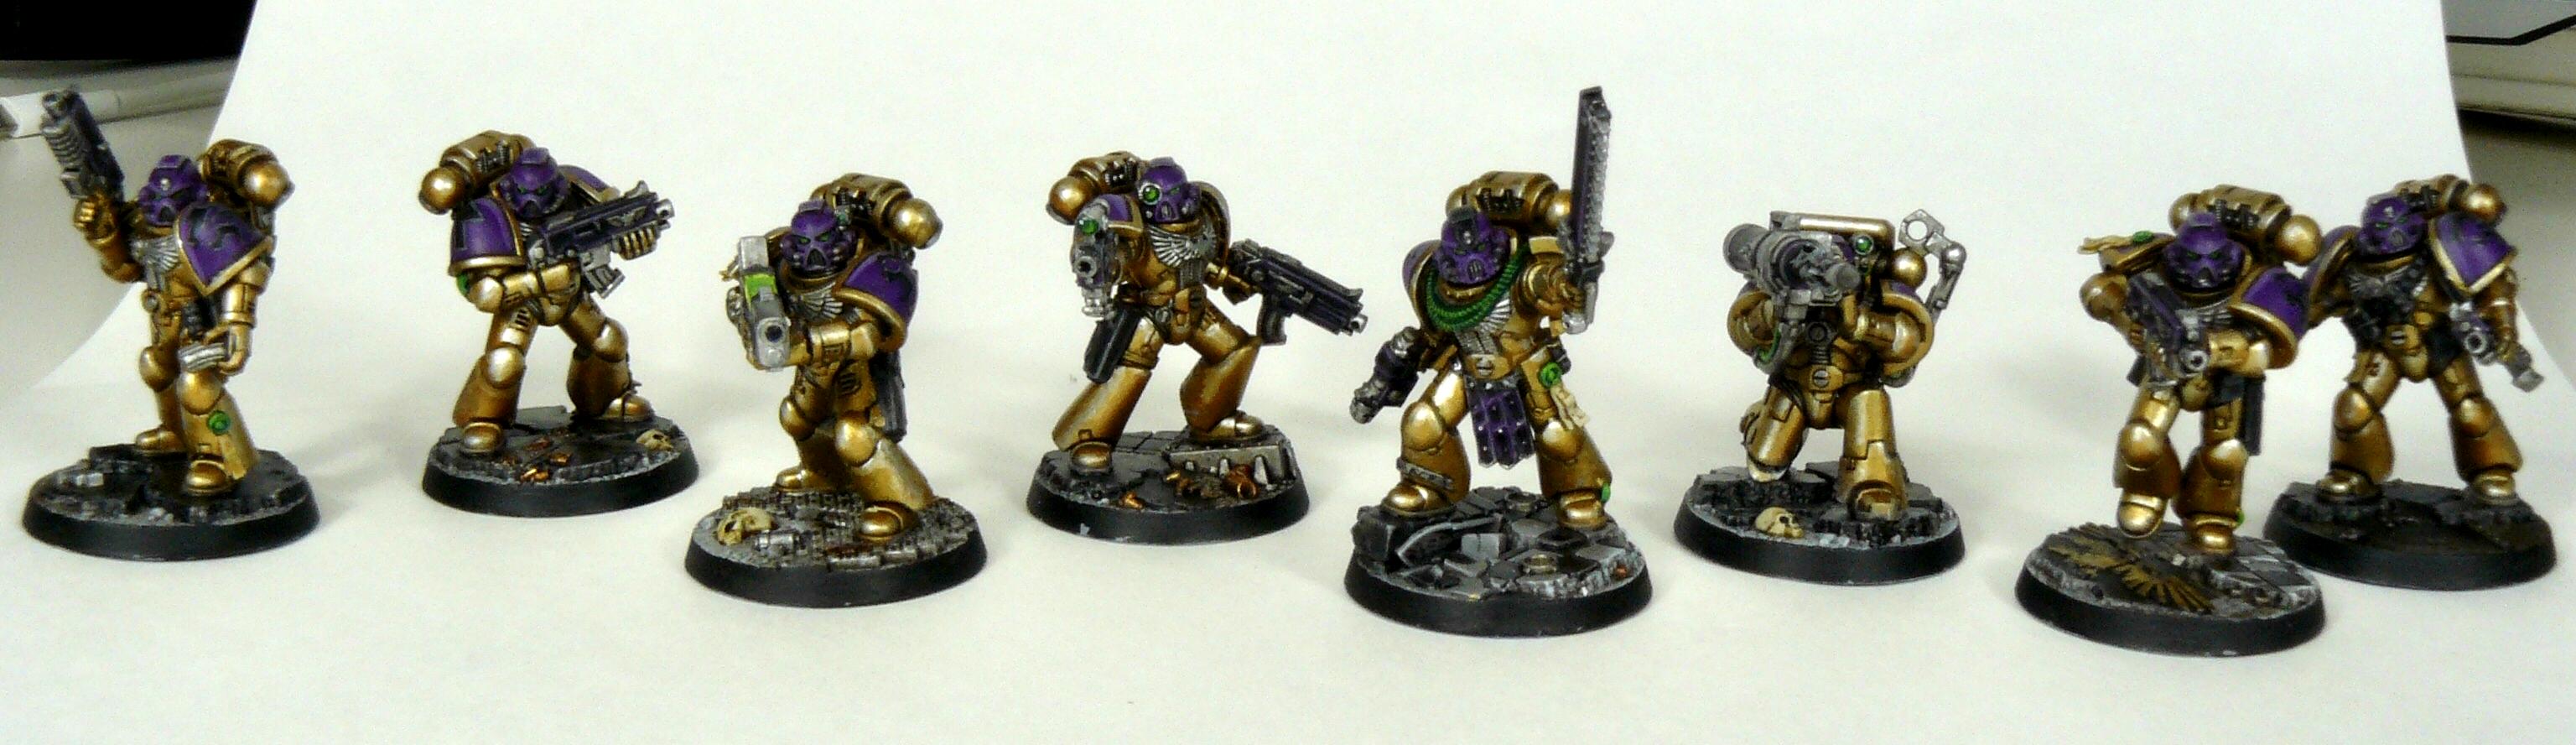 Series 1 Space Marine Heroes Space Marines Tactical Squad Void Panthers Warhammer 40 000 Space Marine Heroes Series 1 Void Panthers Gallery Dakkadakka Roll The Dice To See If I M Getting Drunk